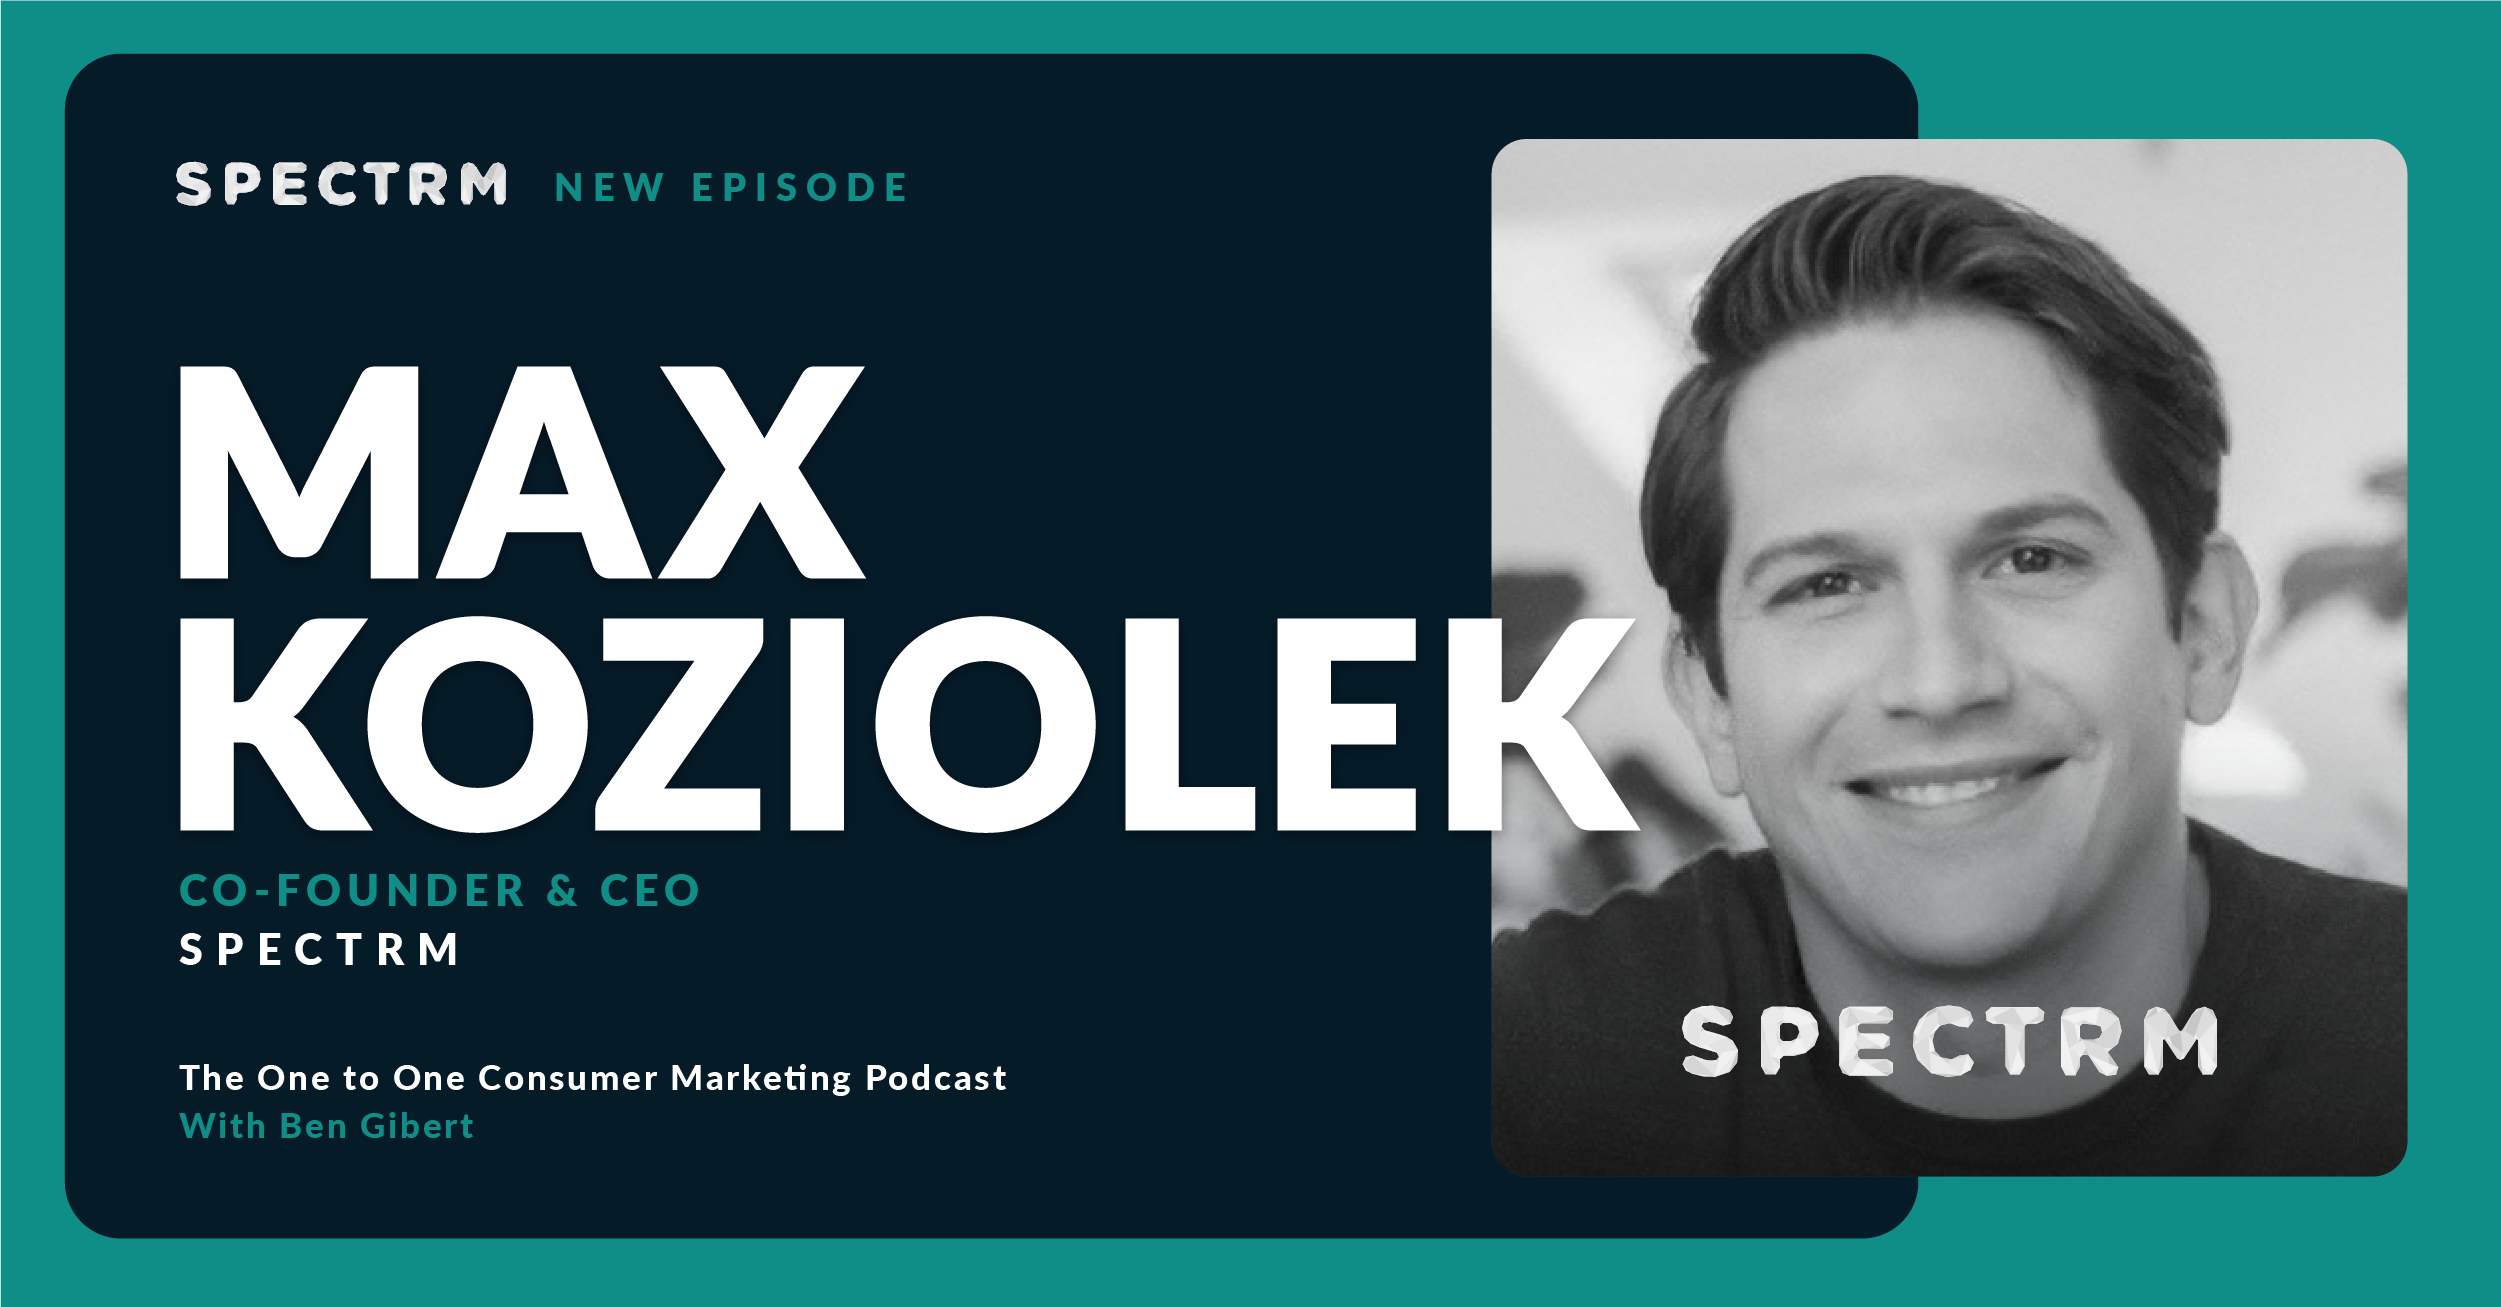 One to One Consumer Marketing Podcast Vision from Max Koziolek